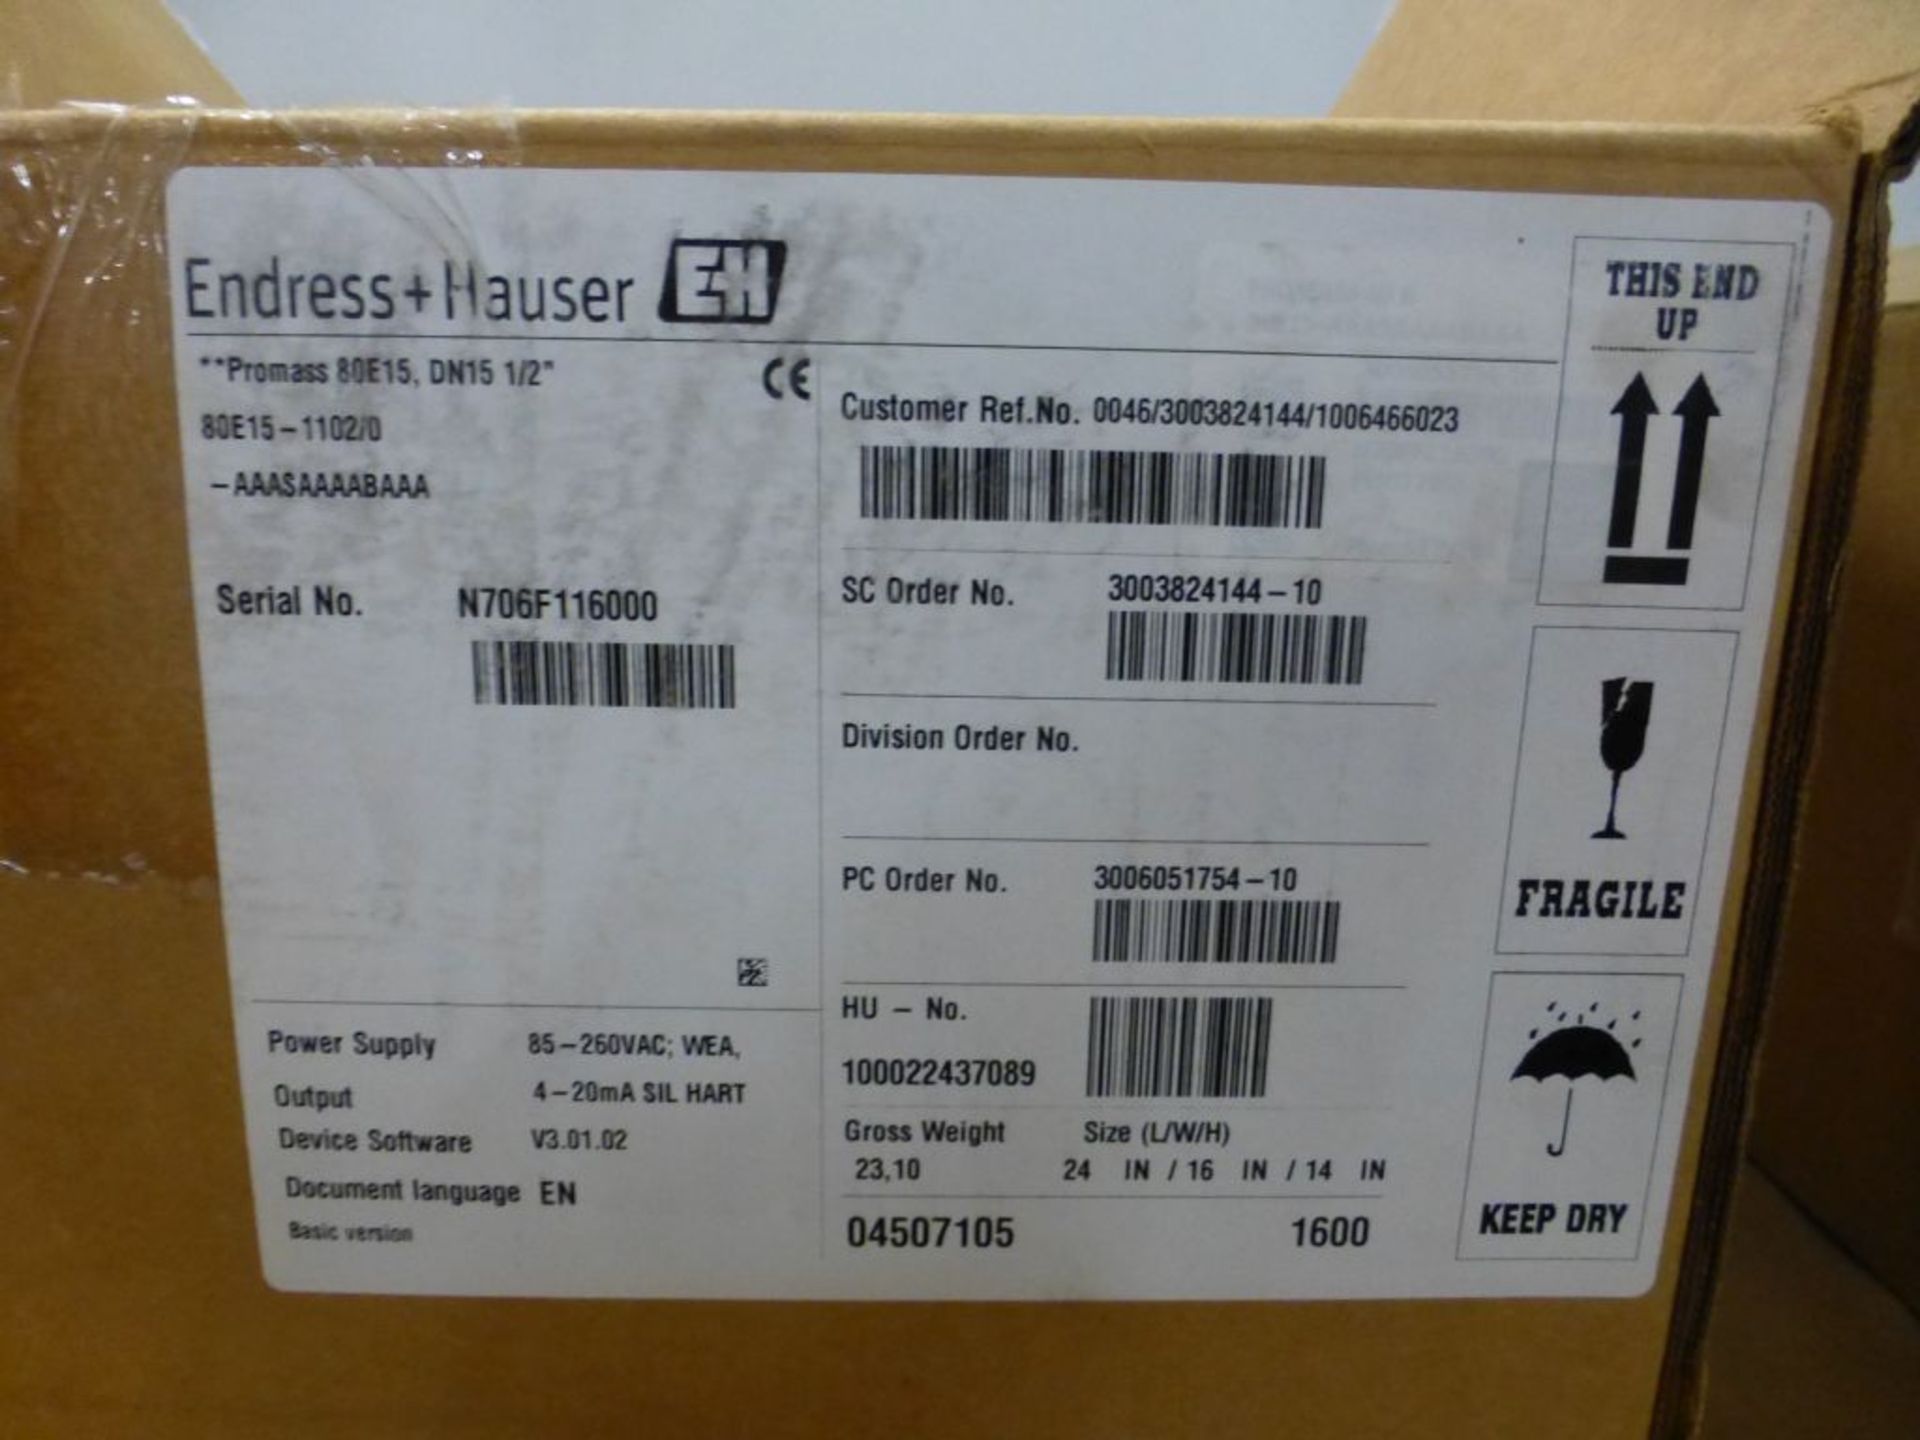 Endress Hauser Promass - Model No. 80E15-1102/0; 85-260 VAC; New Surplus; Tag: 221989 - Image 3 of 5